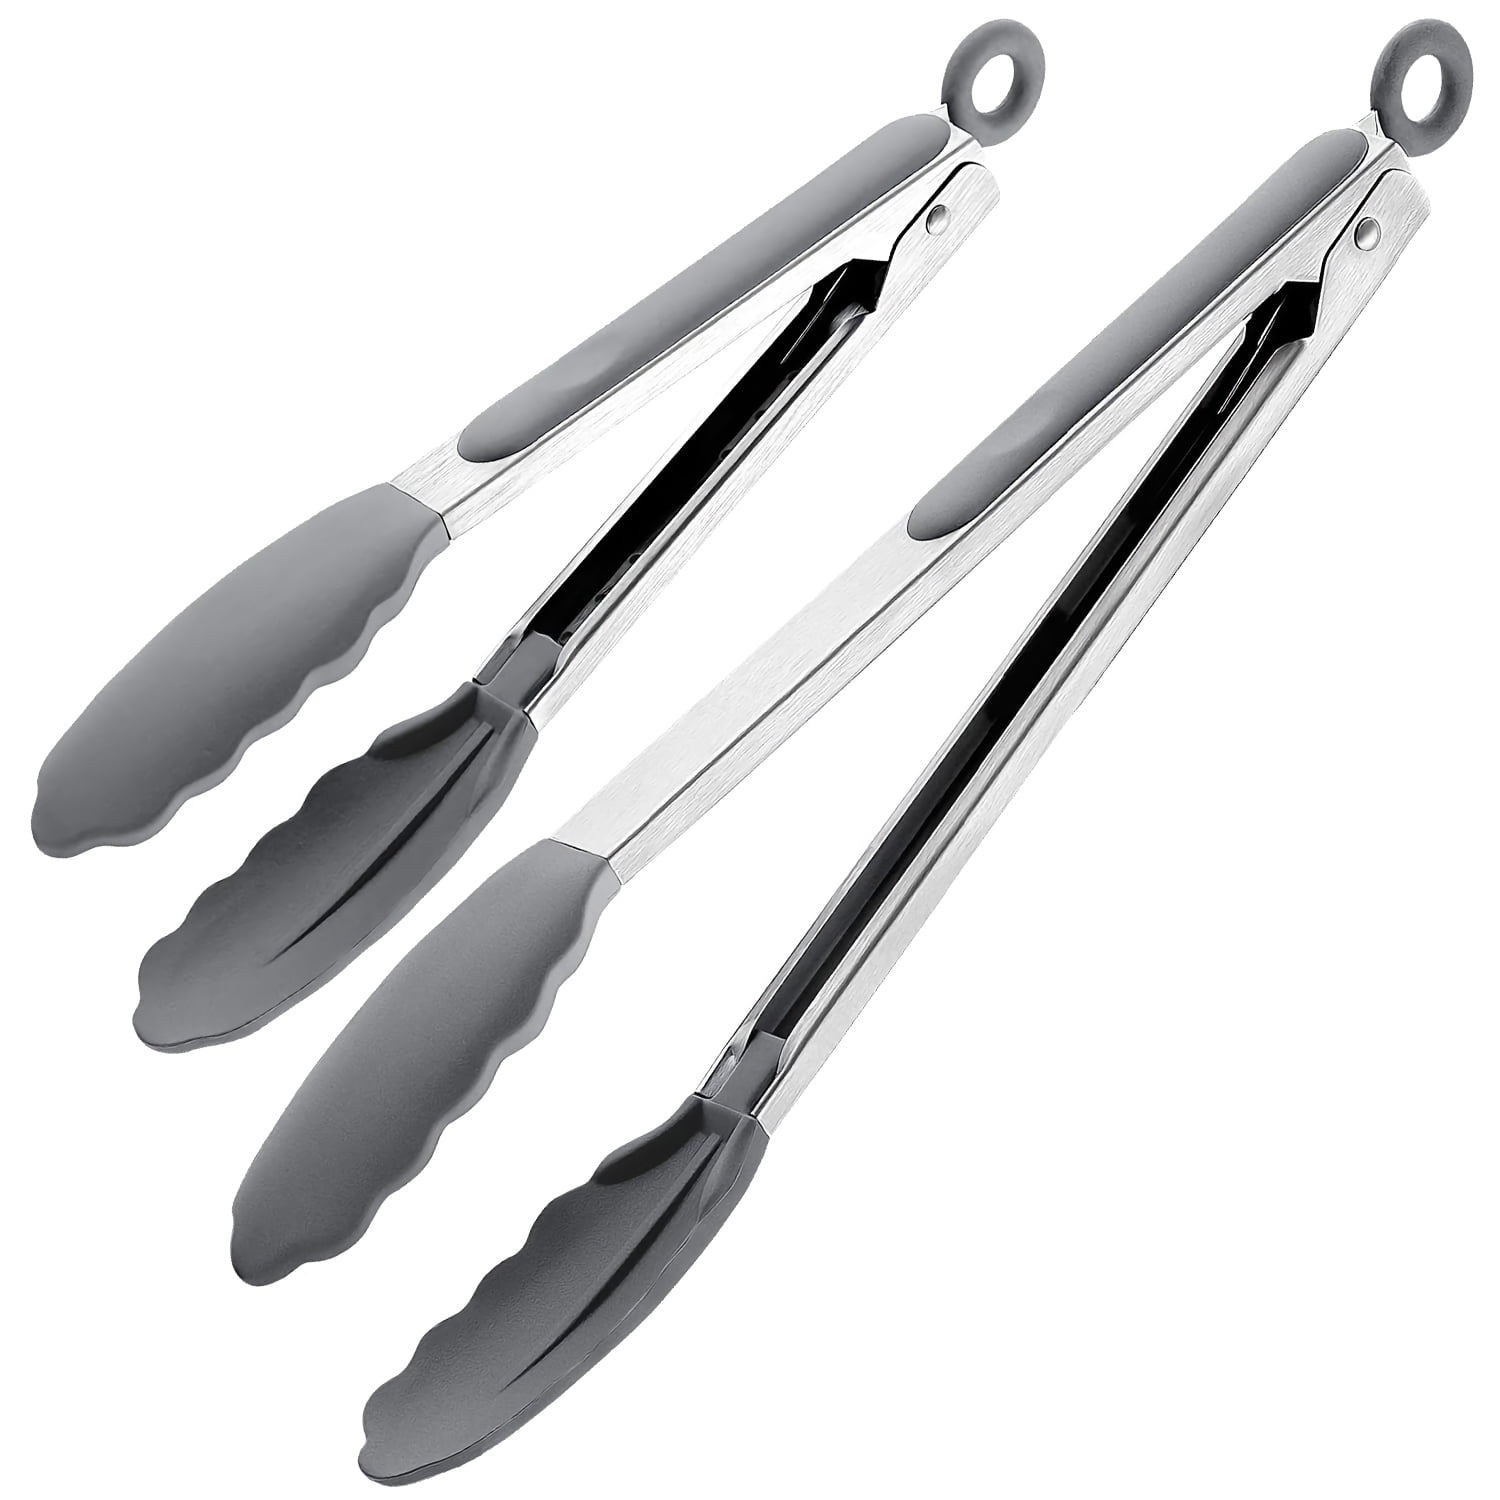 Unique Bargains Kitchen Cooking Set Stainless Steel with Stands Silicone Tongs Burgundy 9&12 2 Pcs